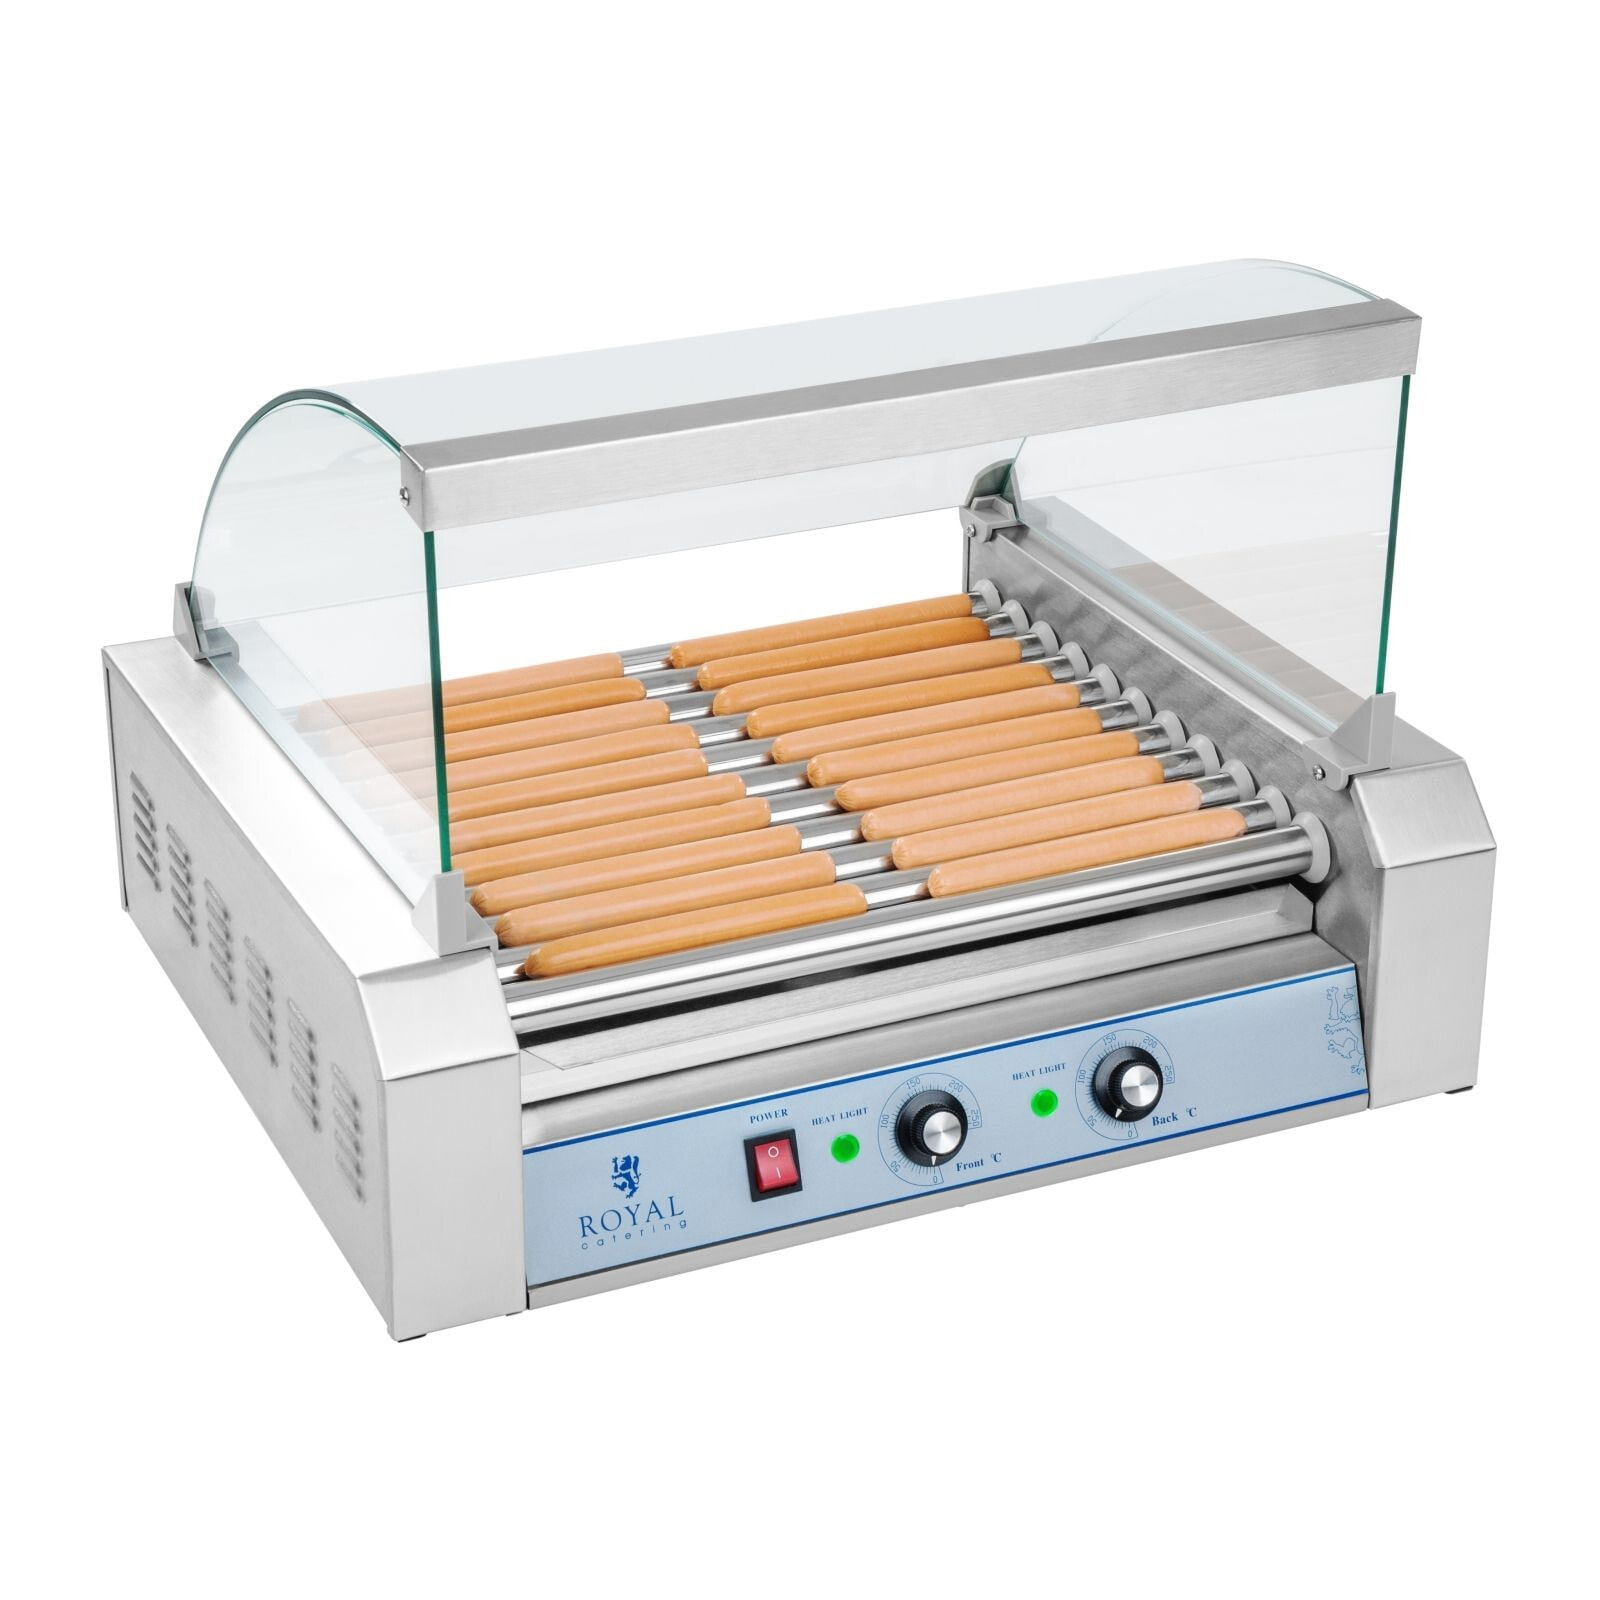 Roller grill with lid. Roller grill. Warmer for sausages. 11 rolls